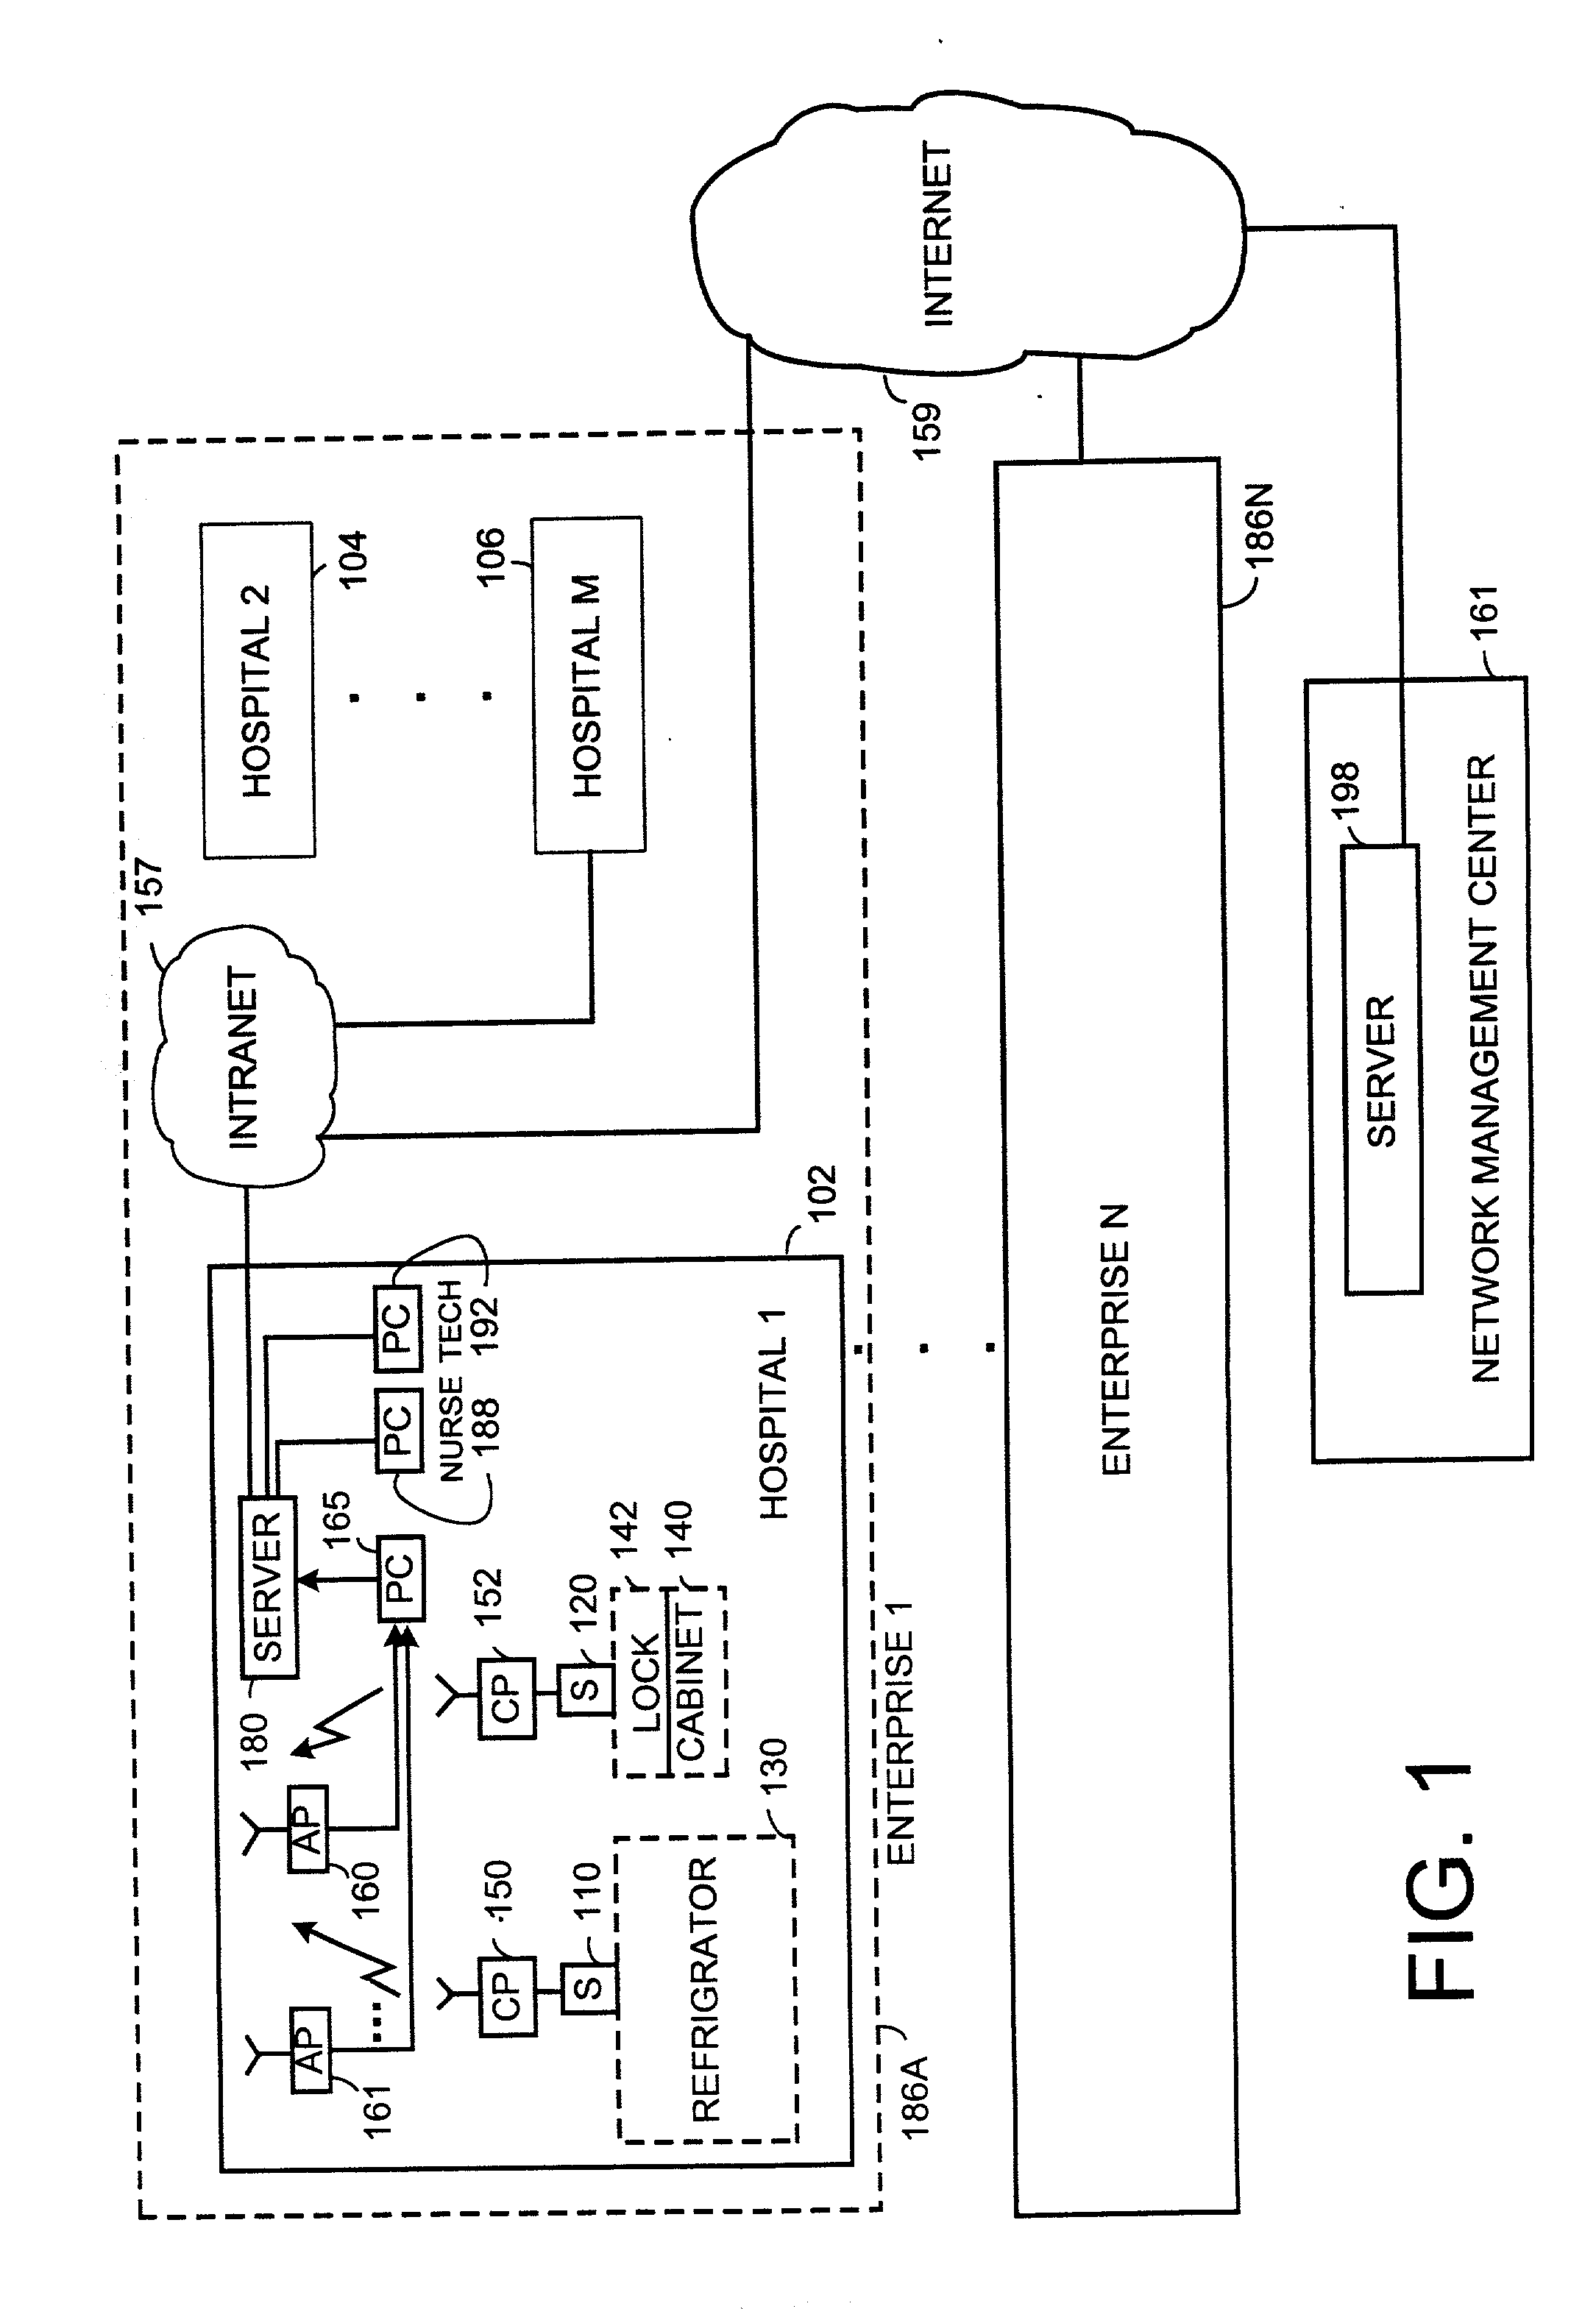 Health care monitoring system and method